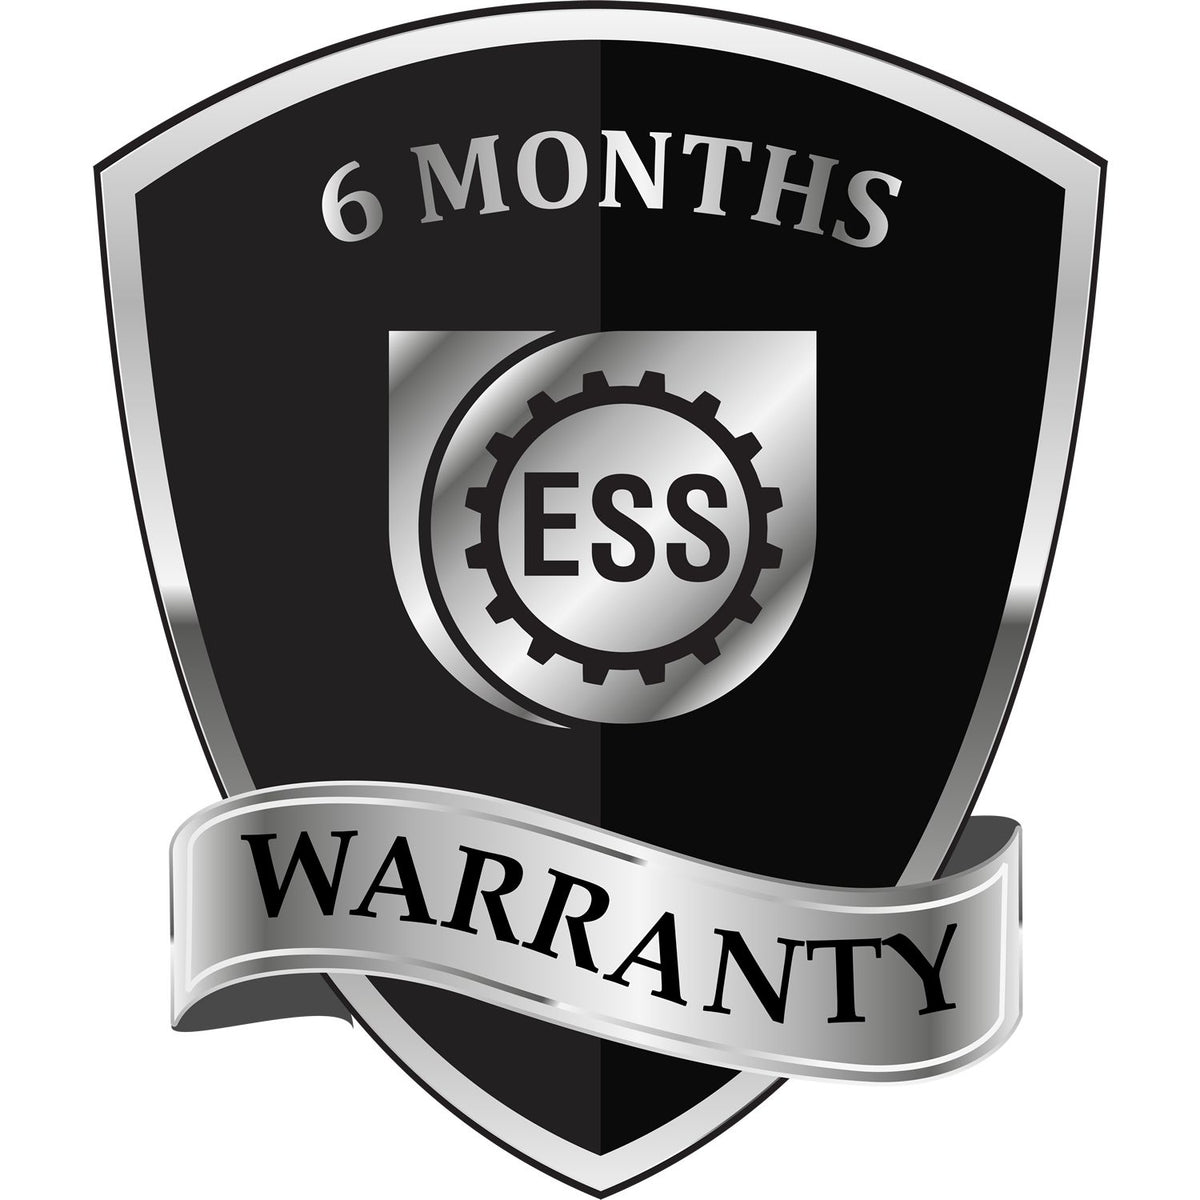 A badge or emblem showing a warranty icon for the Illinois Professional Engineer Seal Stamp